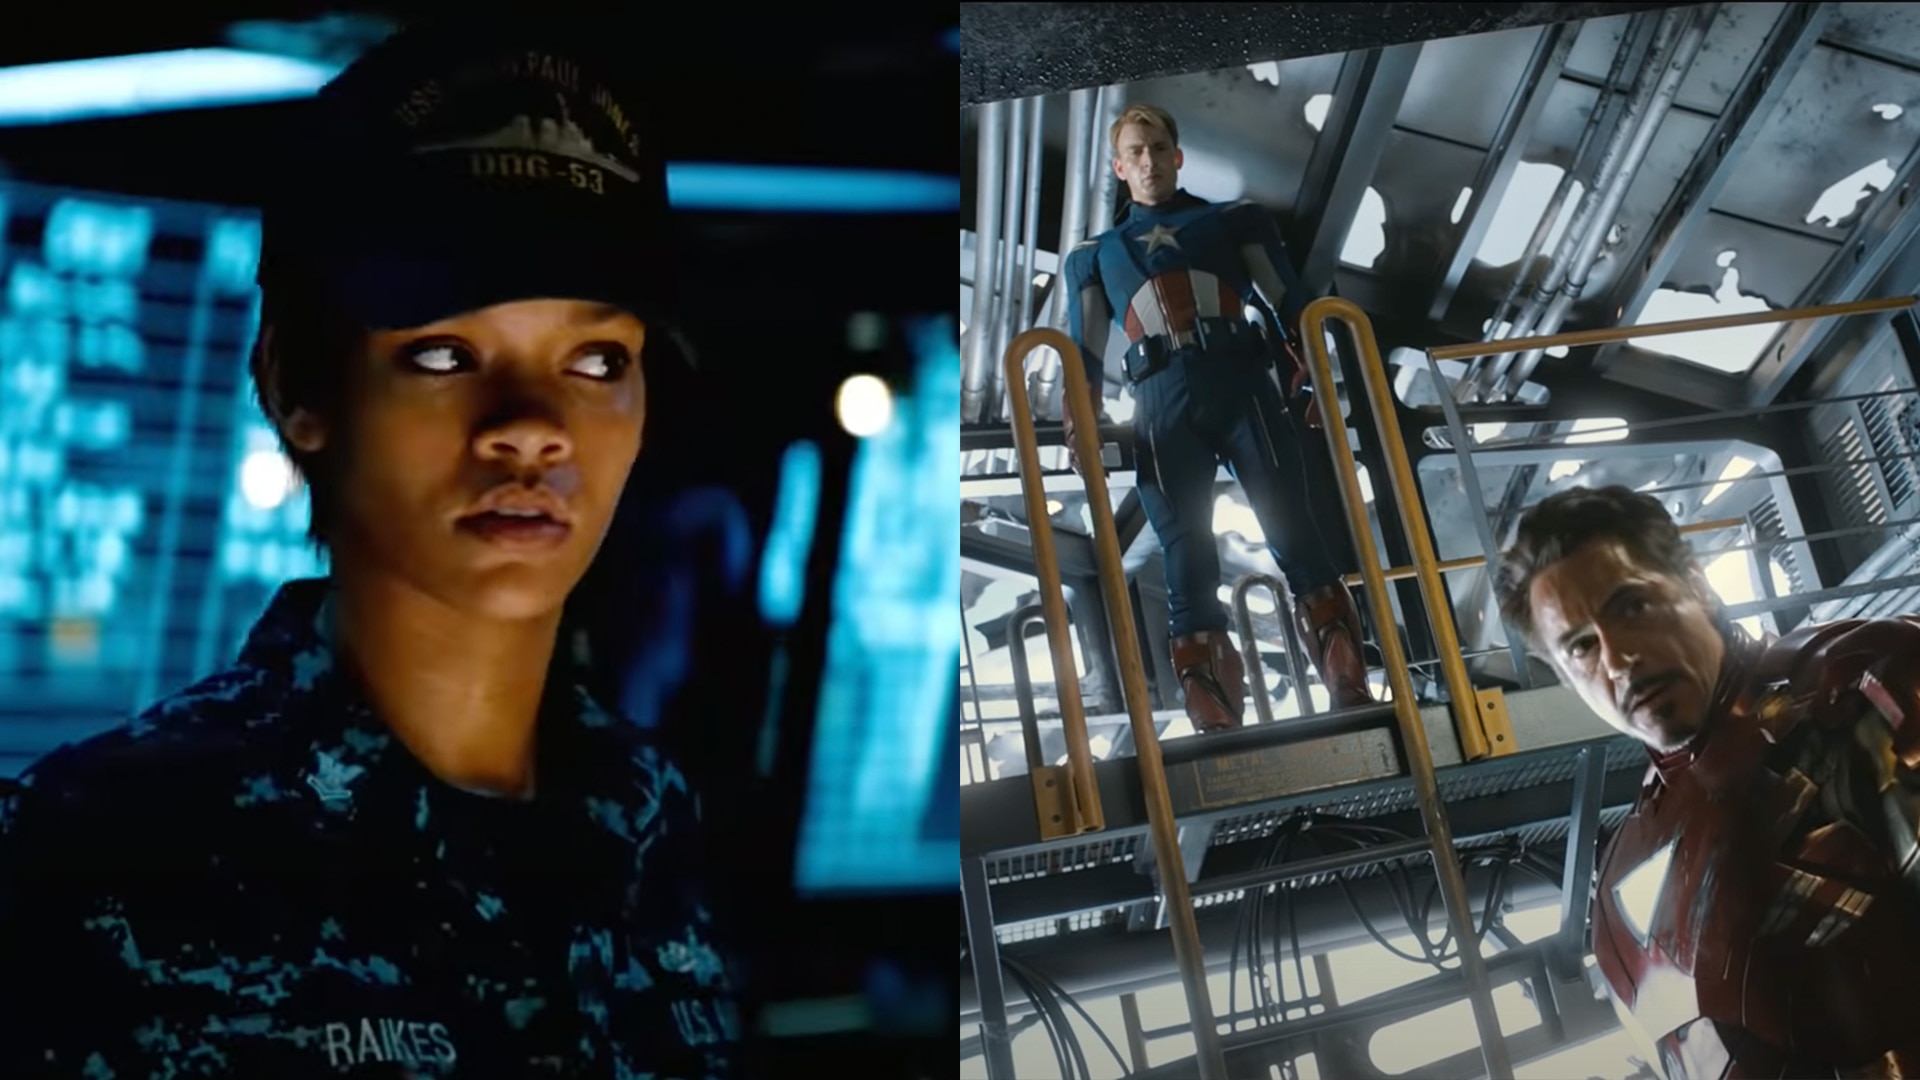 Did Marvel’s first ‘Avengers’ movie sink Peter Berg’s ‘Battleship’ at the 2012 domestic box office?